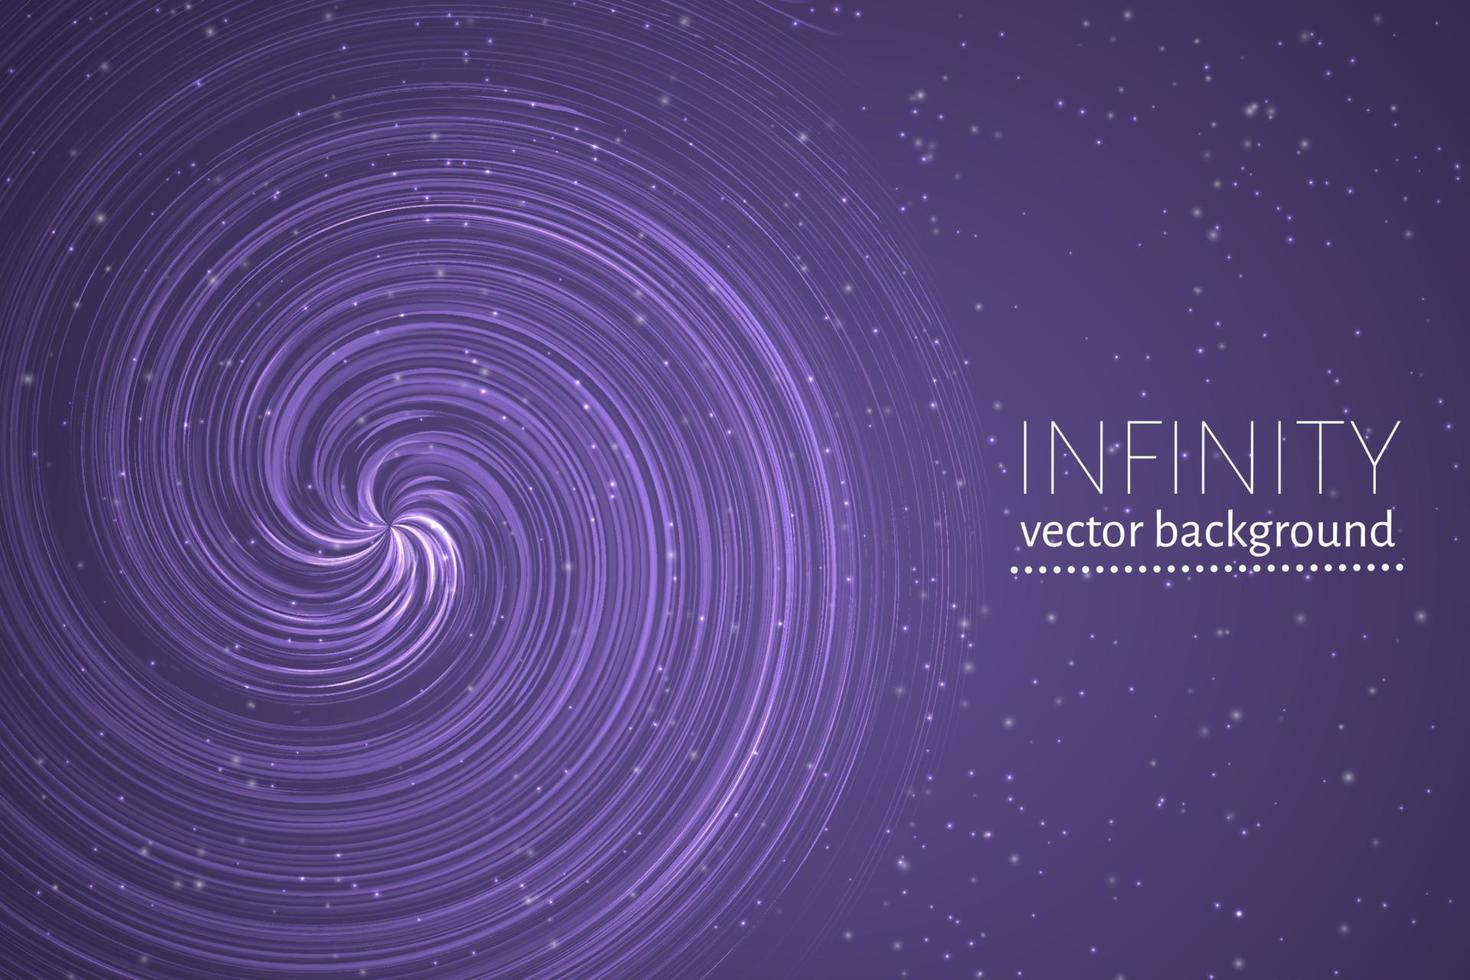 Ultra violet wavy space background. Glowing spiral cosmic banner. Infinity vector illustration. Easy to edit design template.